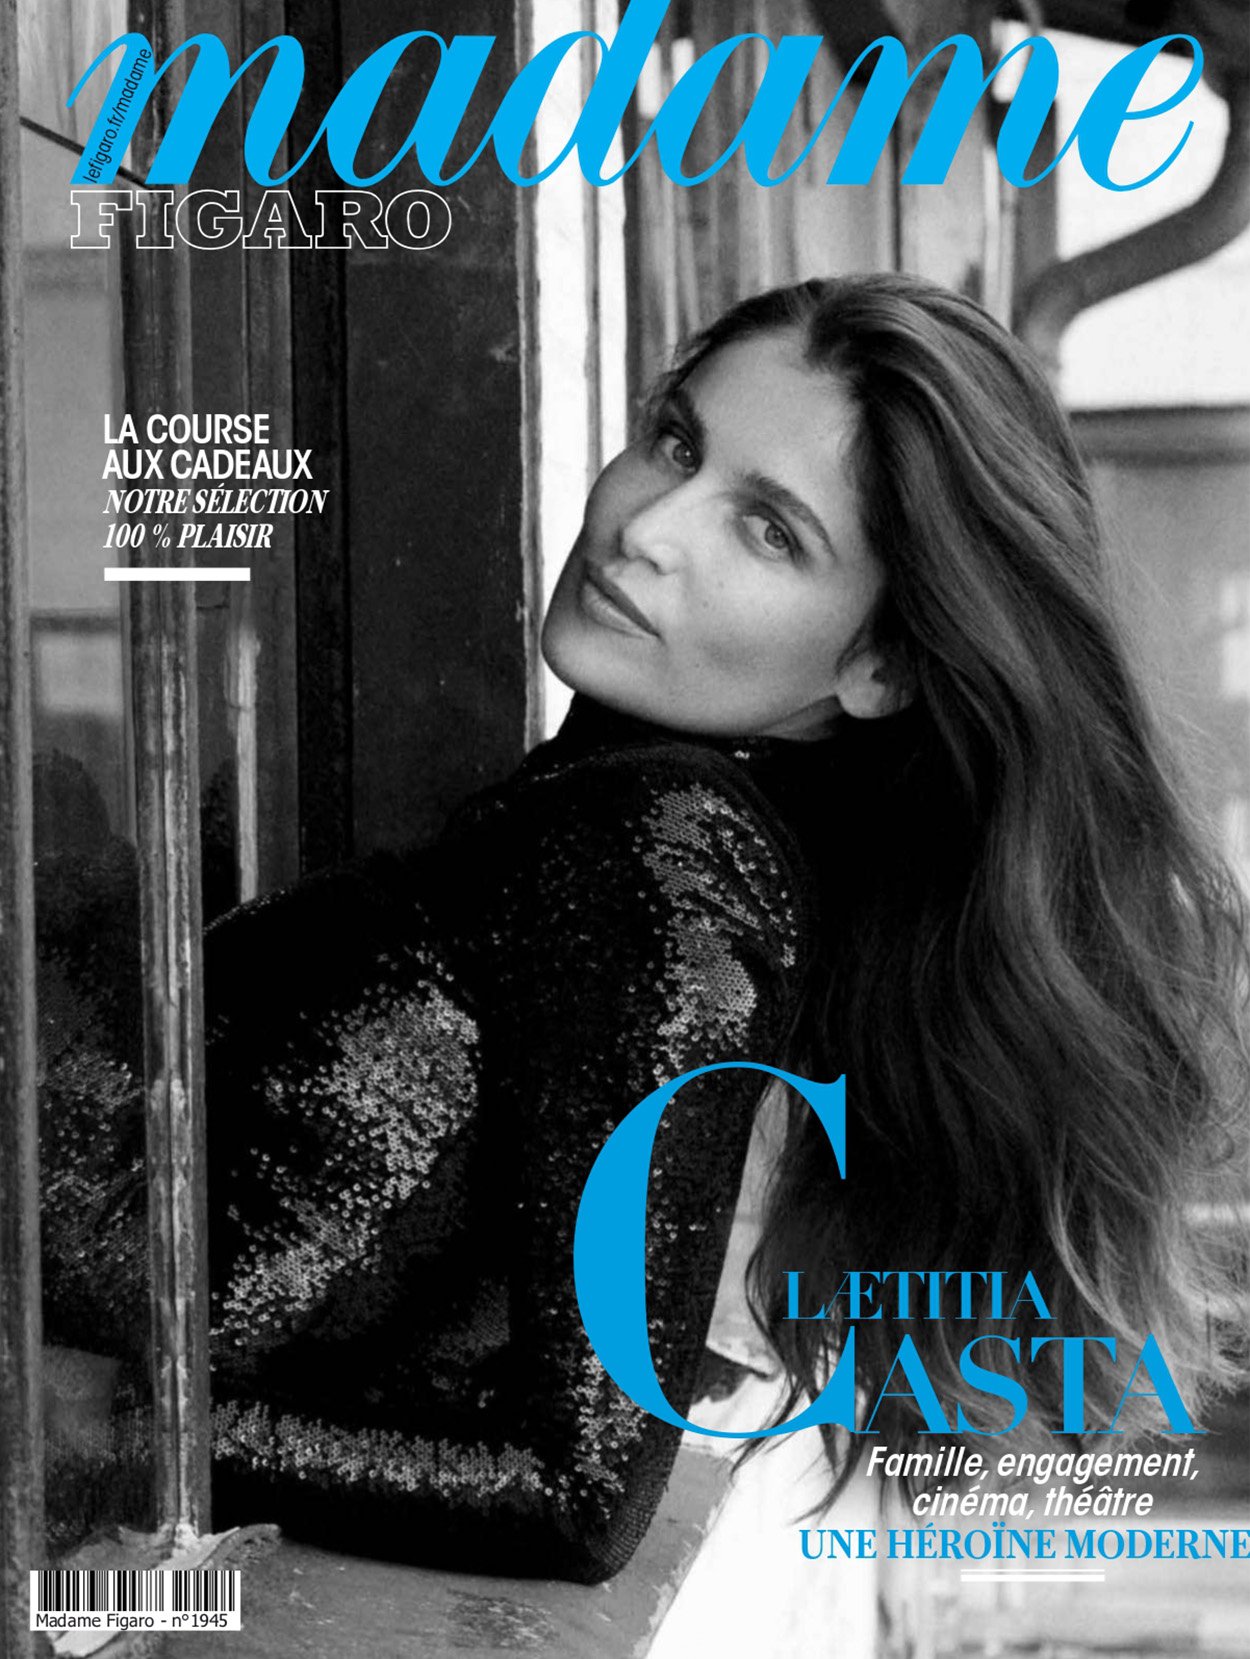 Laetitia-Casta-covers-Madame-Figaro-December-3rd-2021-by-Philip-Gay-1.jpg